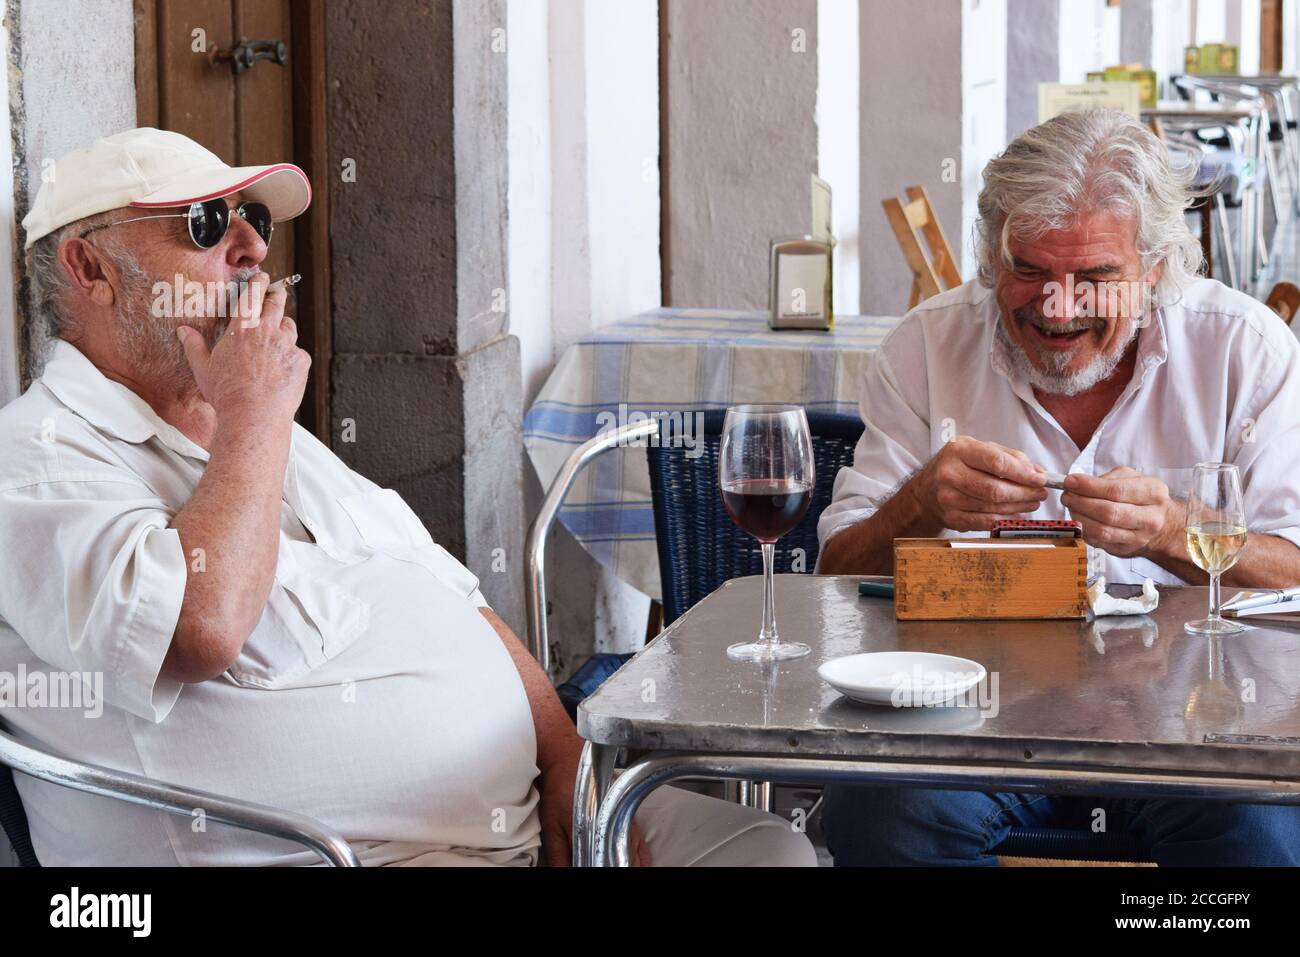 Madrid, Spain - August 24th 2016 - Two men socializing outside a bar in a sunny day in the Spanish Capital Stock Photo